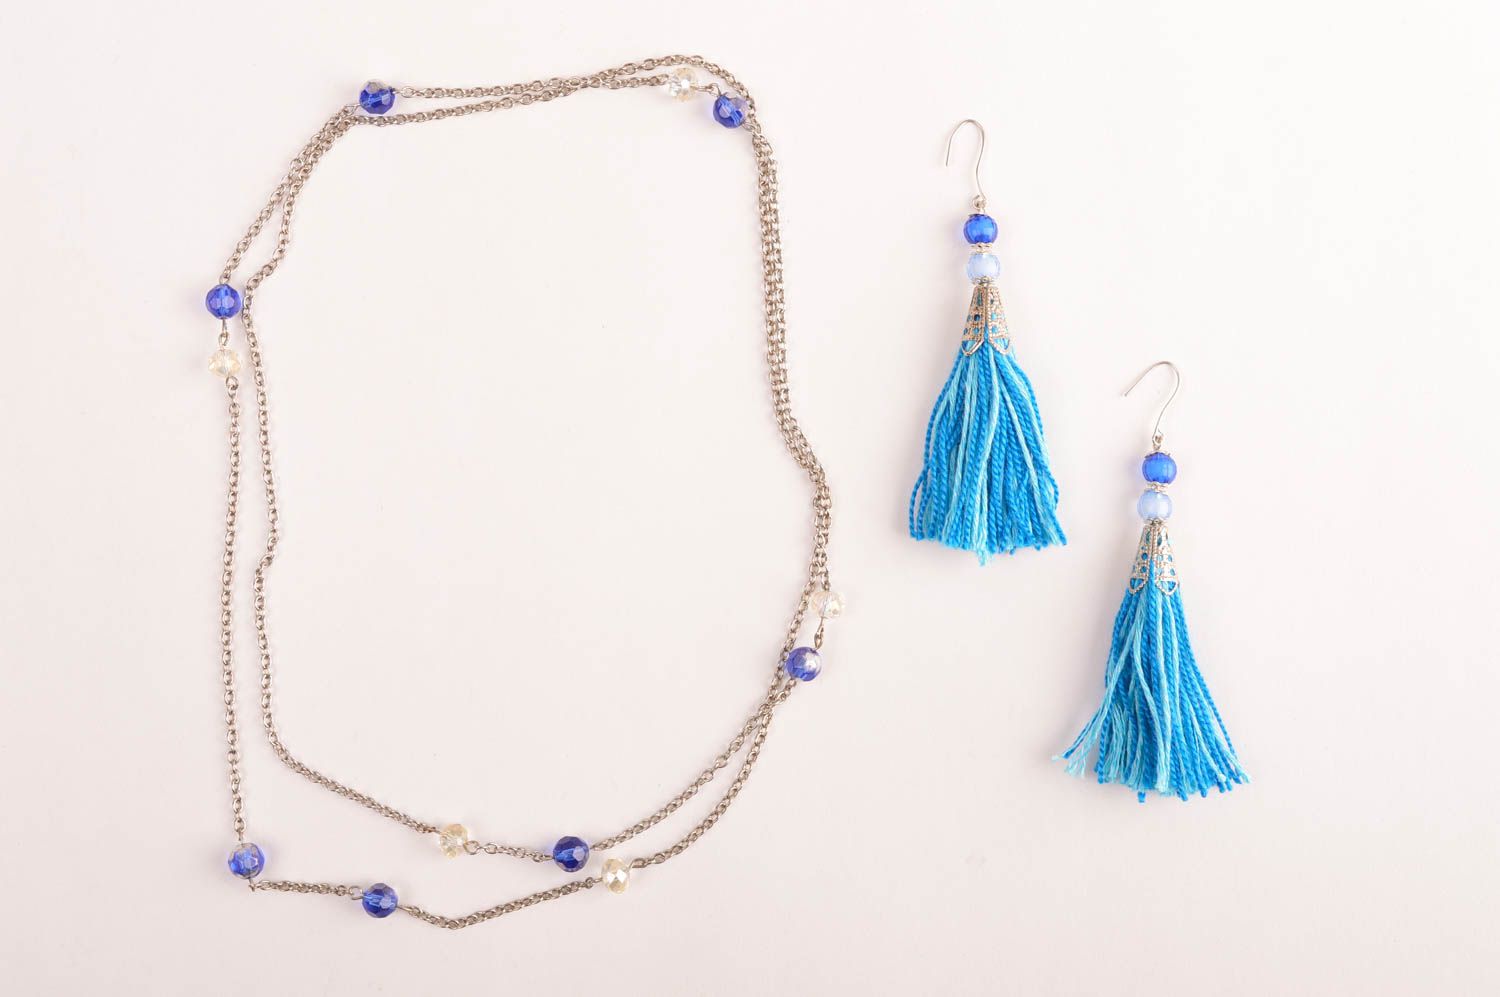 Unusual handmade metal necklace with beads textile tassel earrings gifts for her photo 2